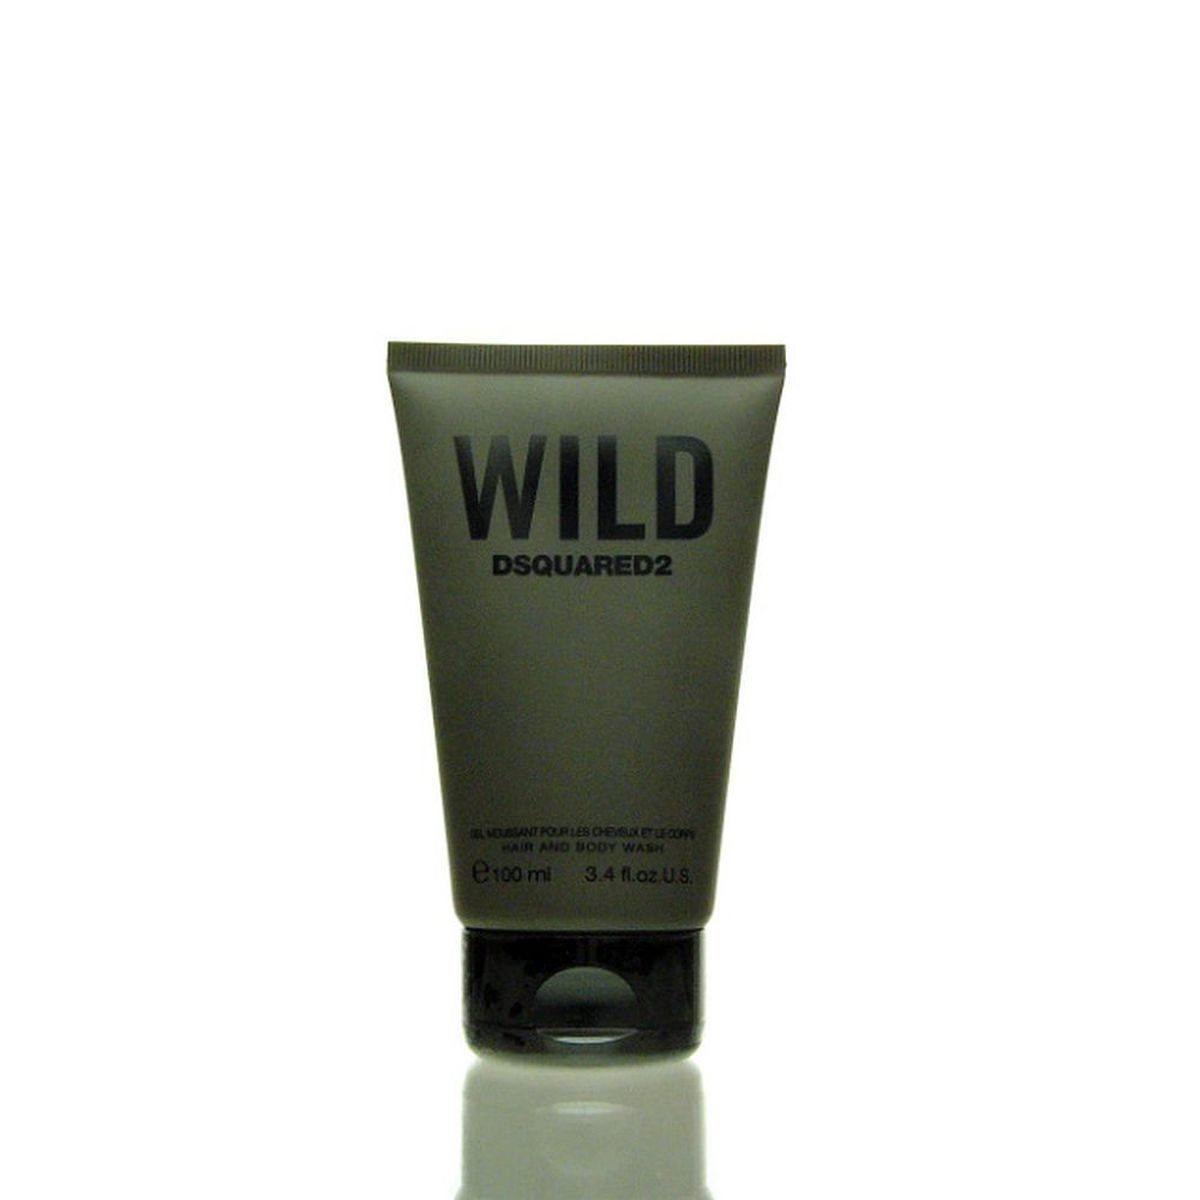 Hair Duschpflege Body ml Dsquared2 Wild Wash Dsquared² and 100